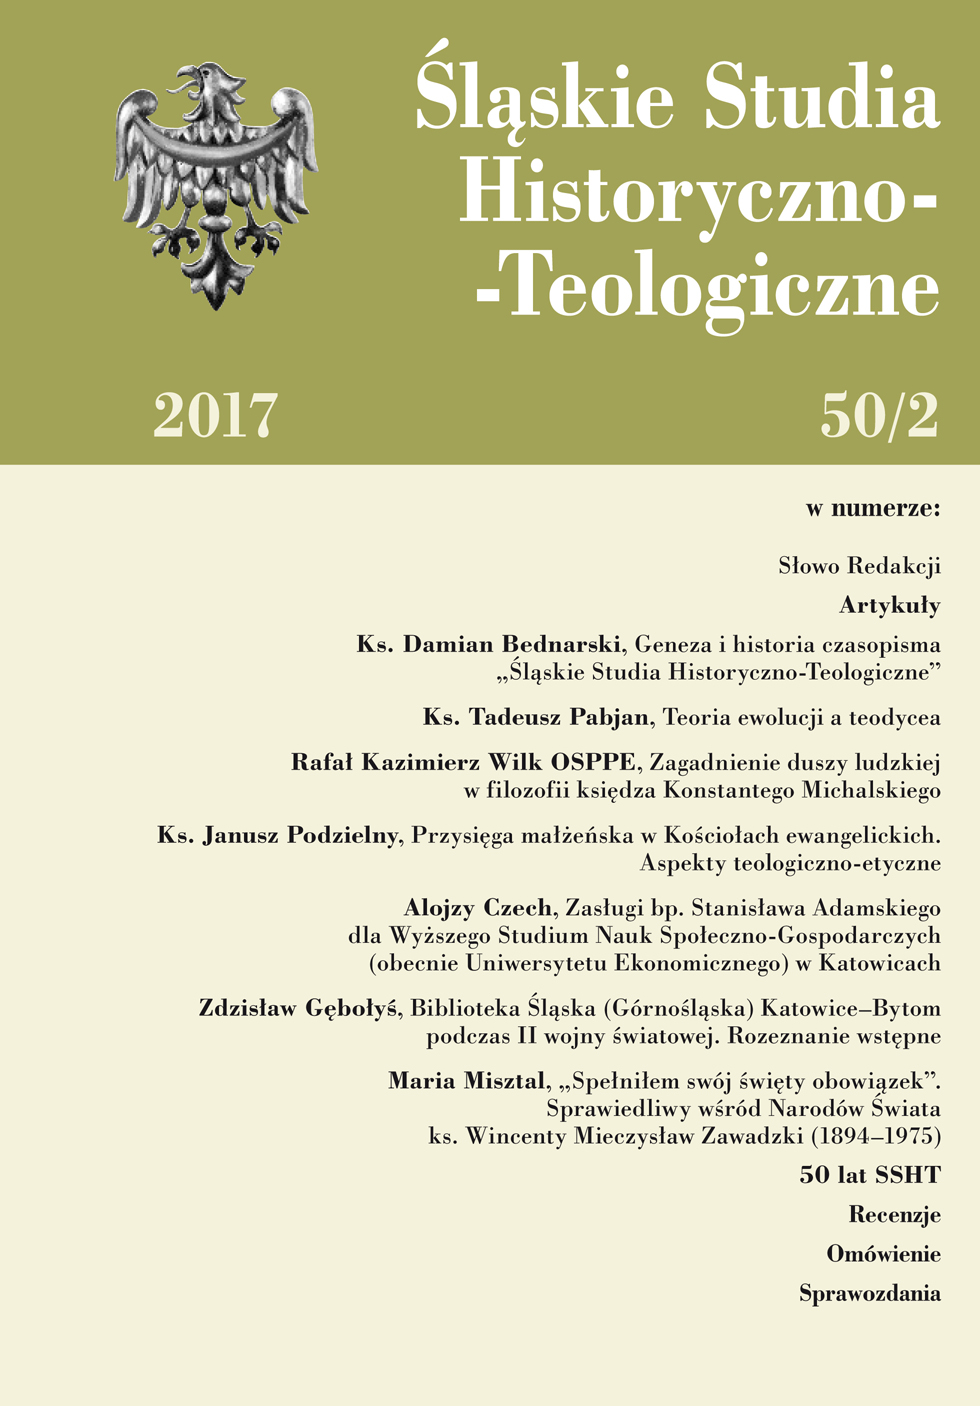 The Origins and History of the Journal “Silesian Historical and Theological Studies” Cover Image